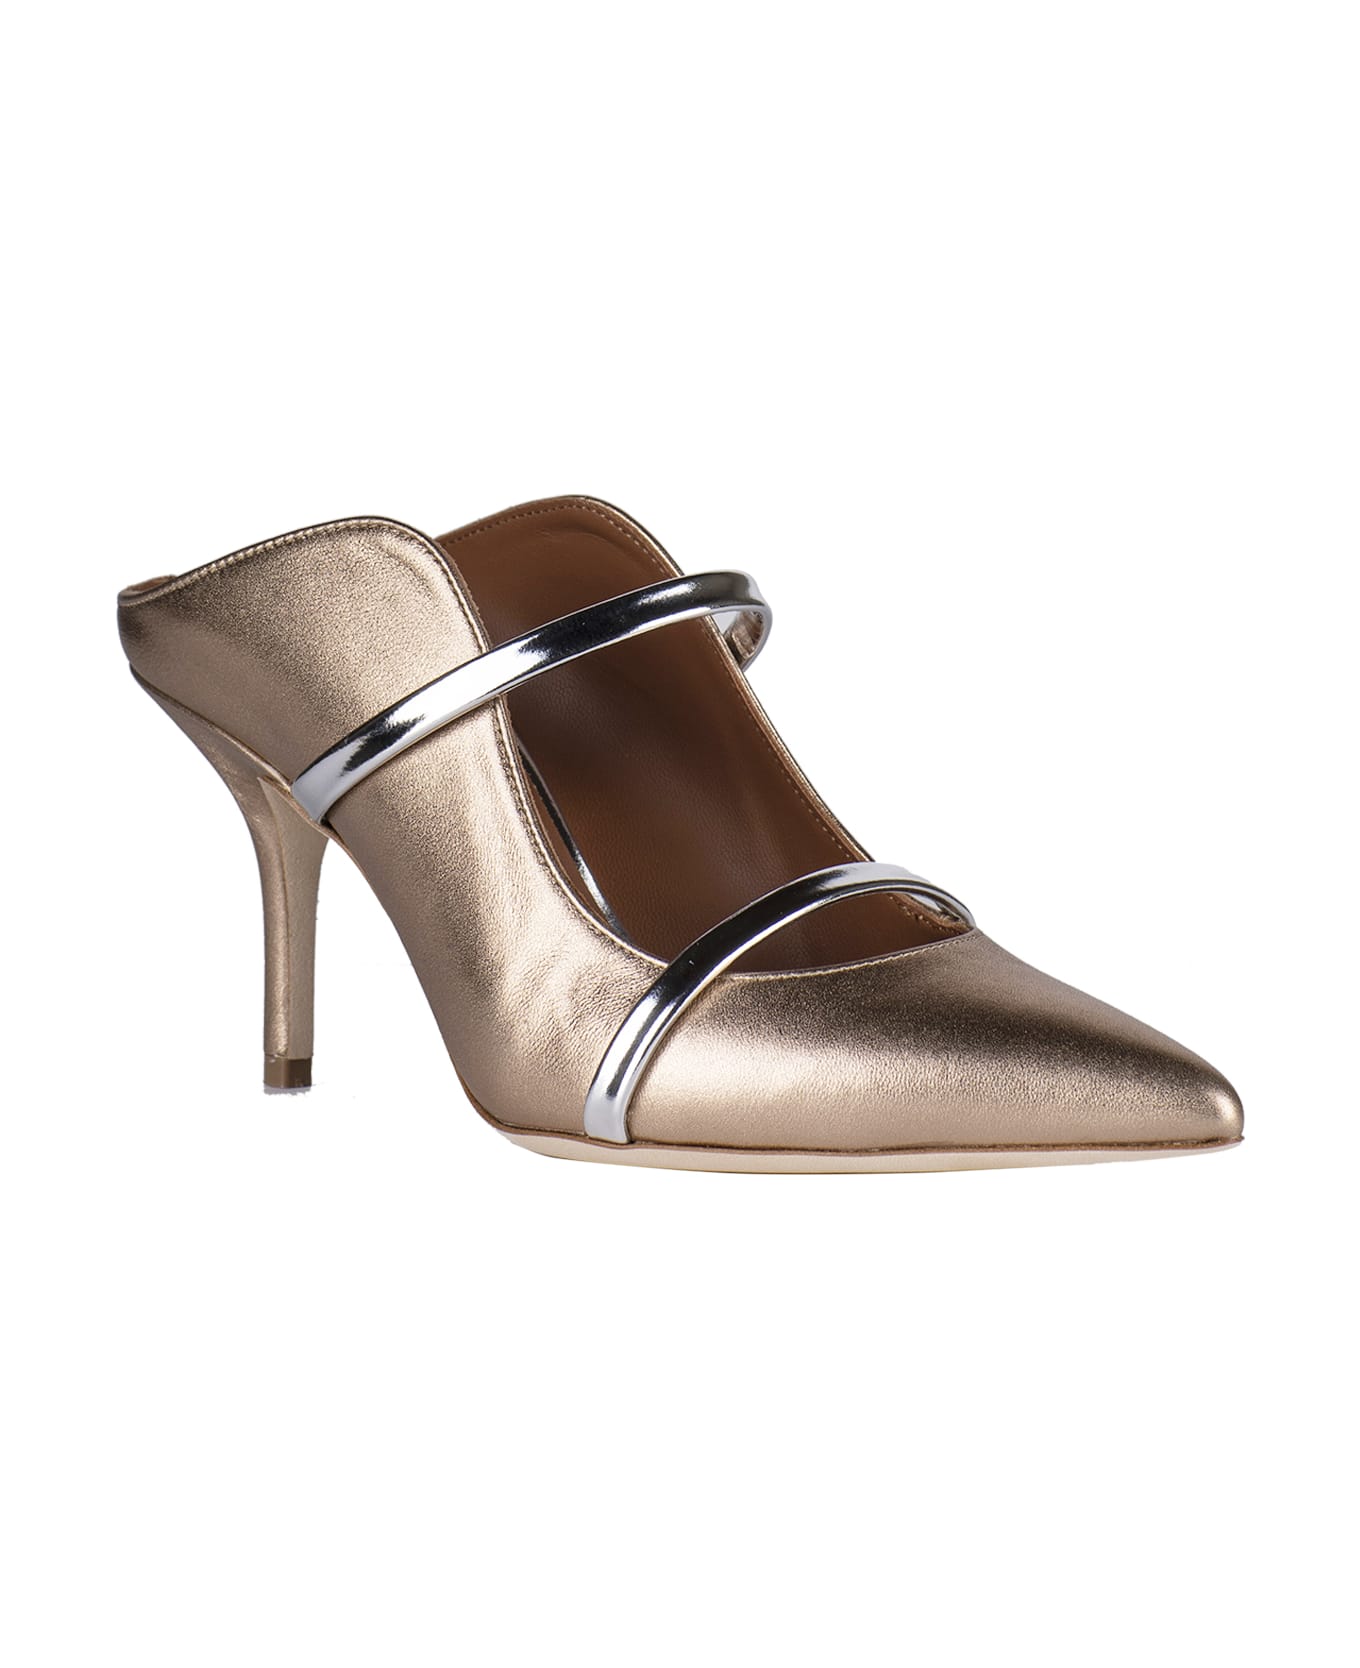 Malone Souliers Slip-on Pumps - Gold